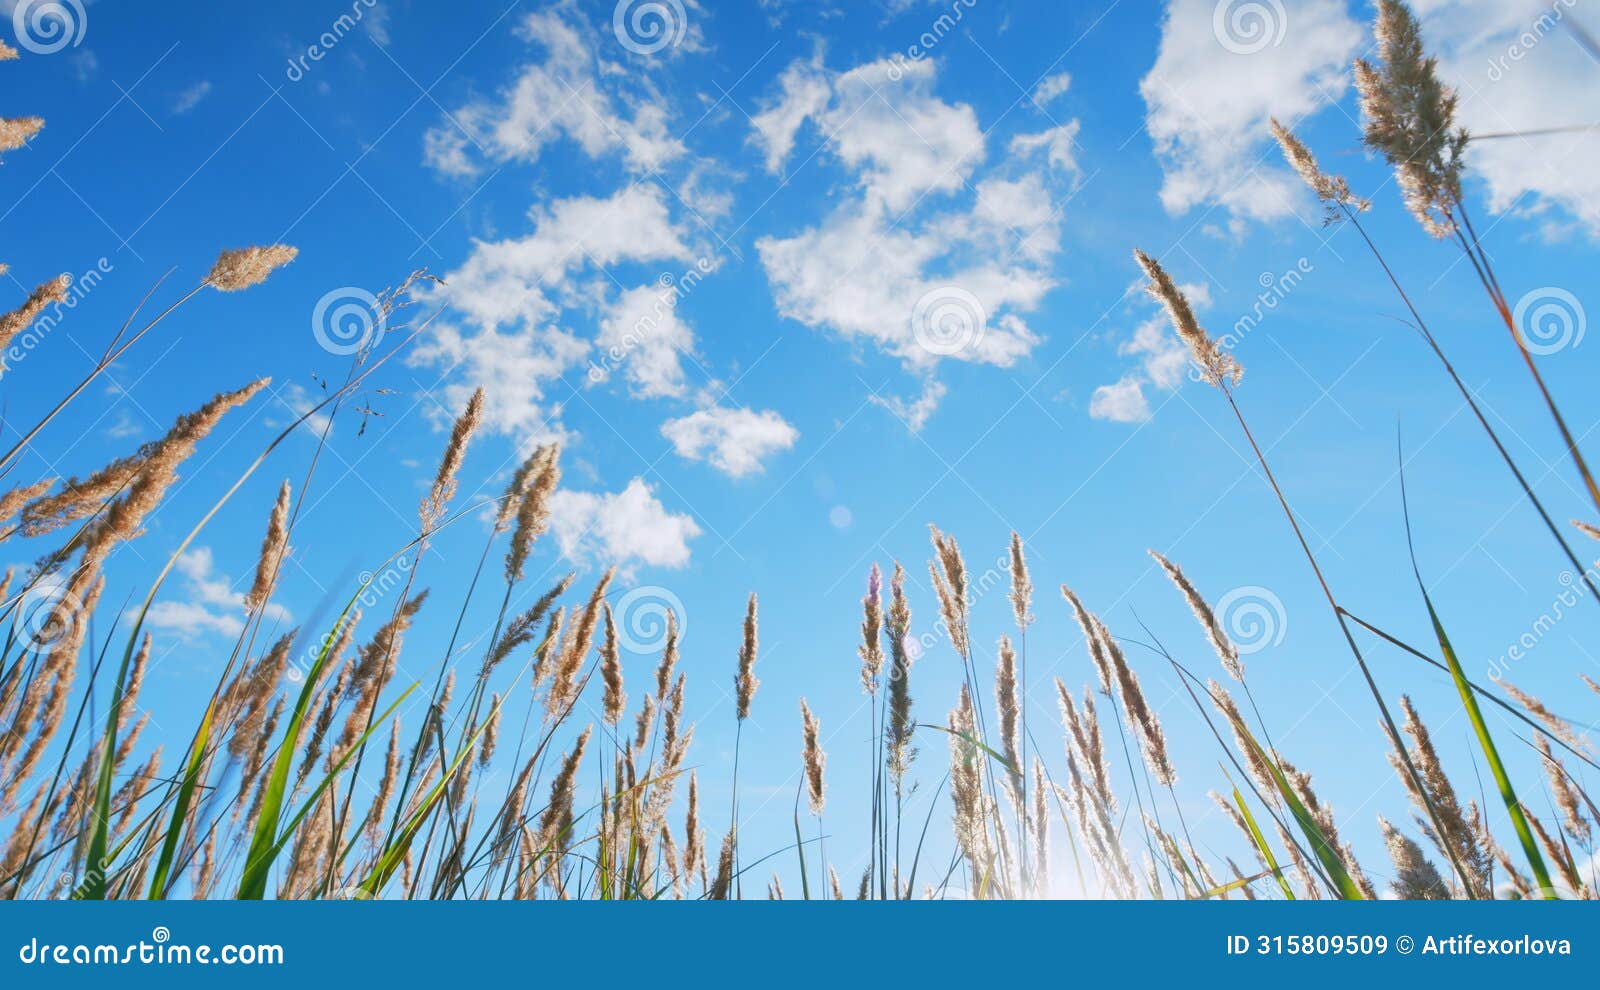 reeds sway on wind and sun rays. reeds sway on wind in sunset light background. low angle view.